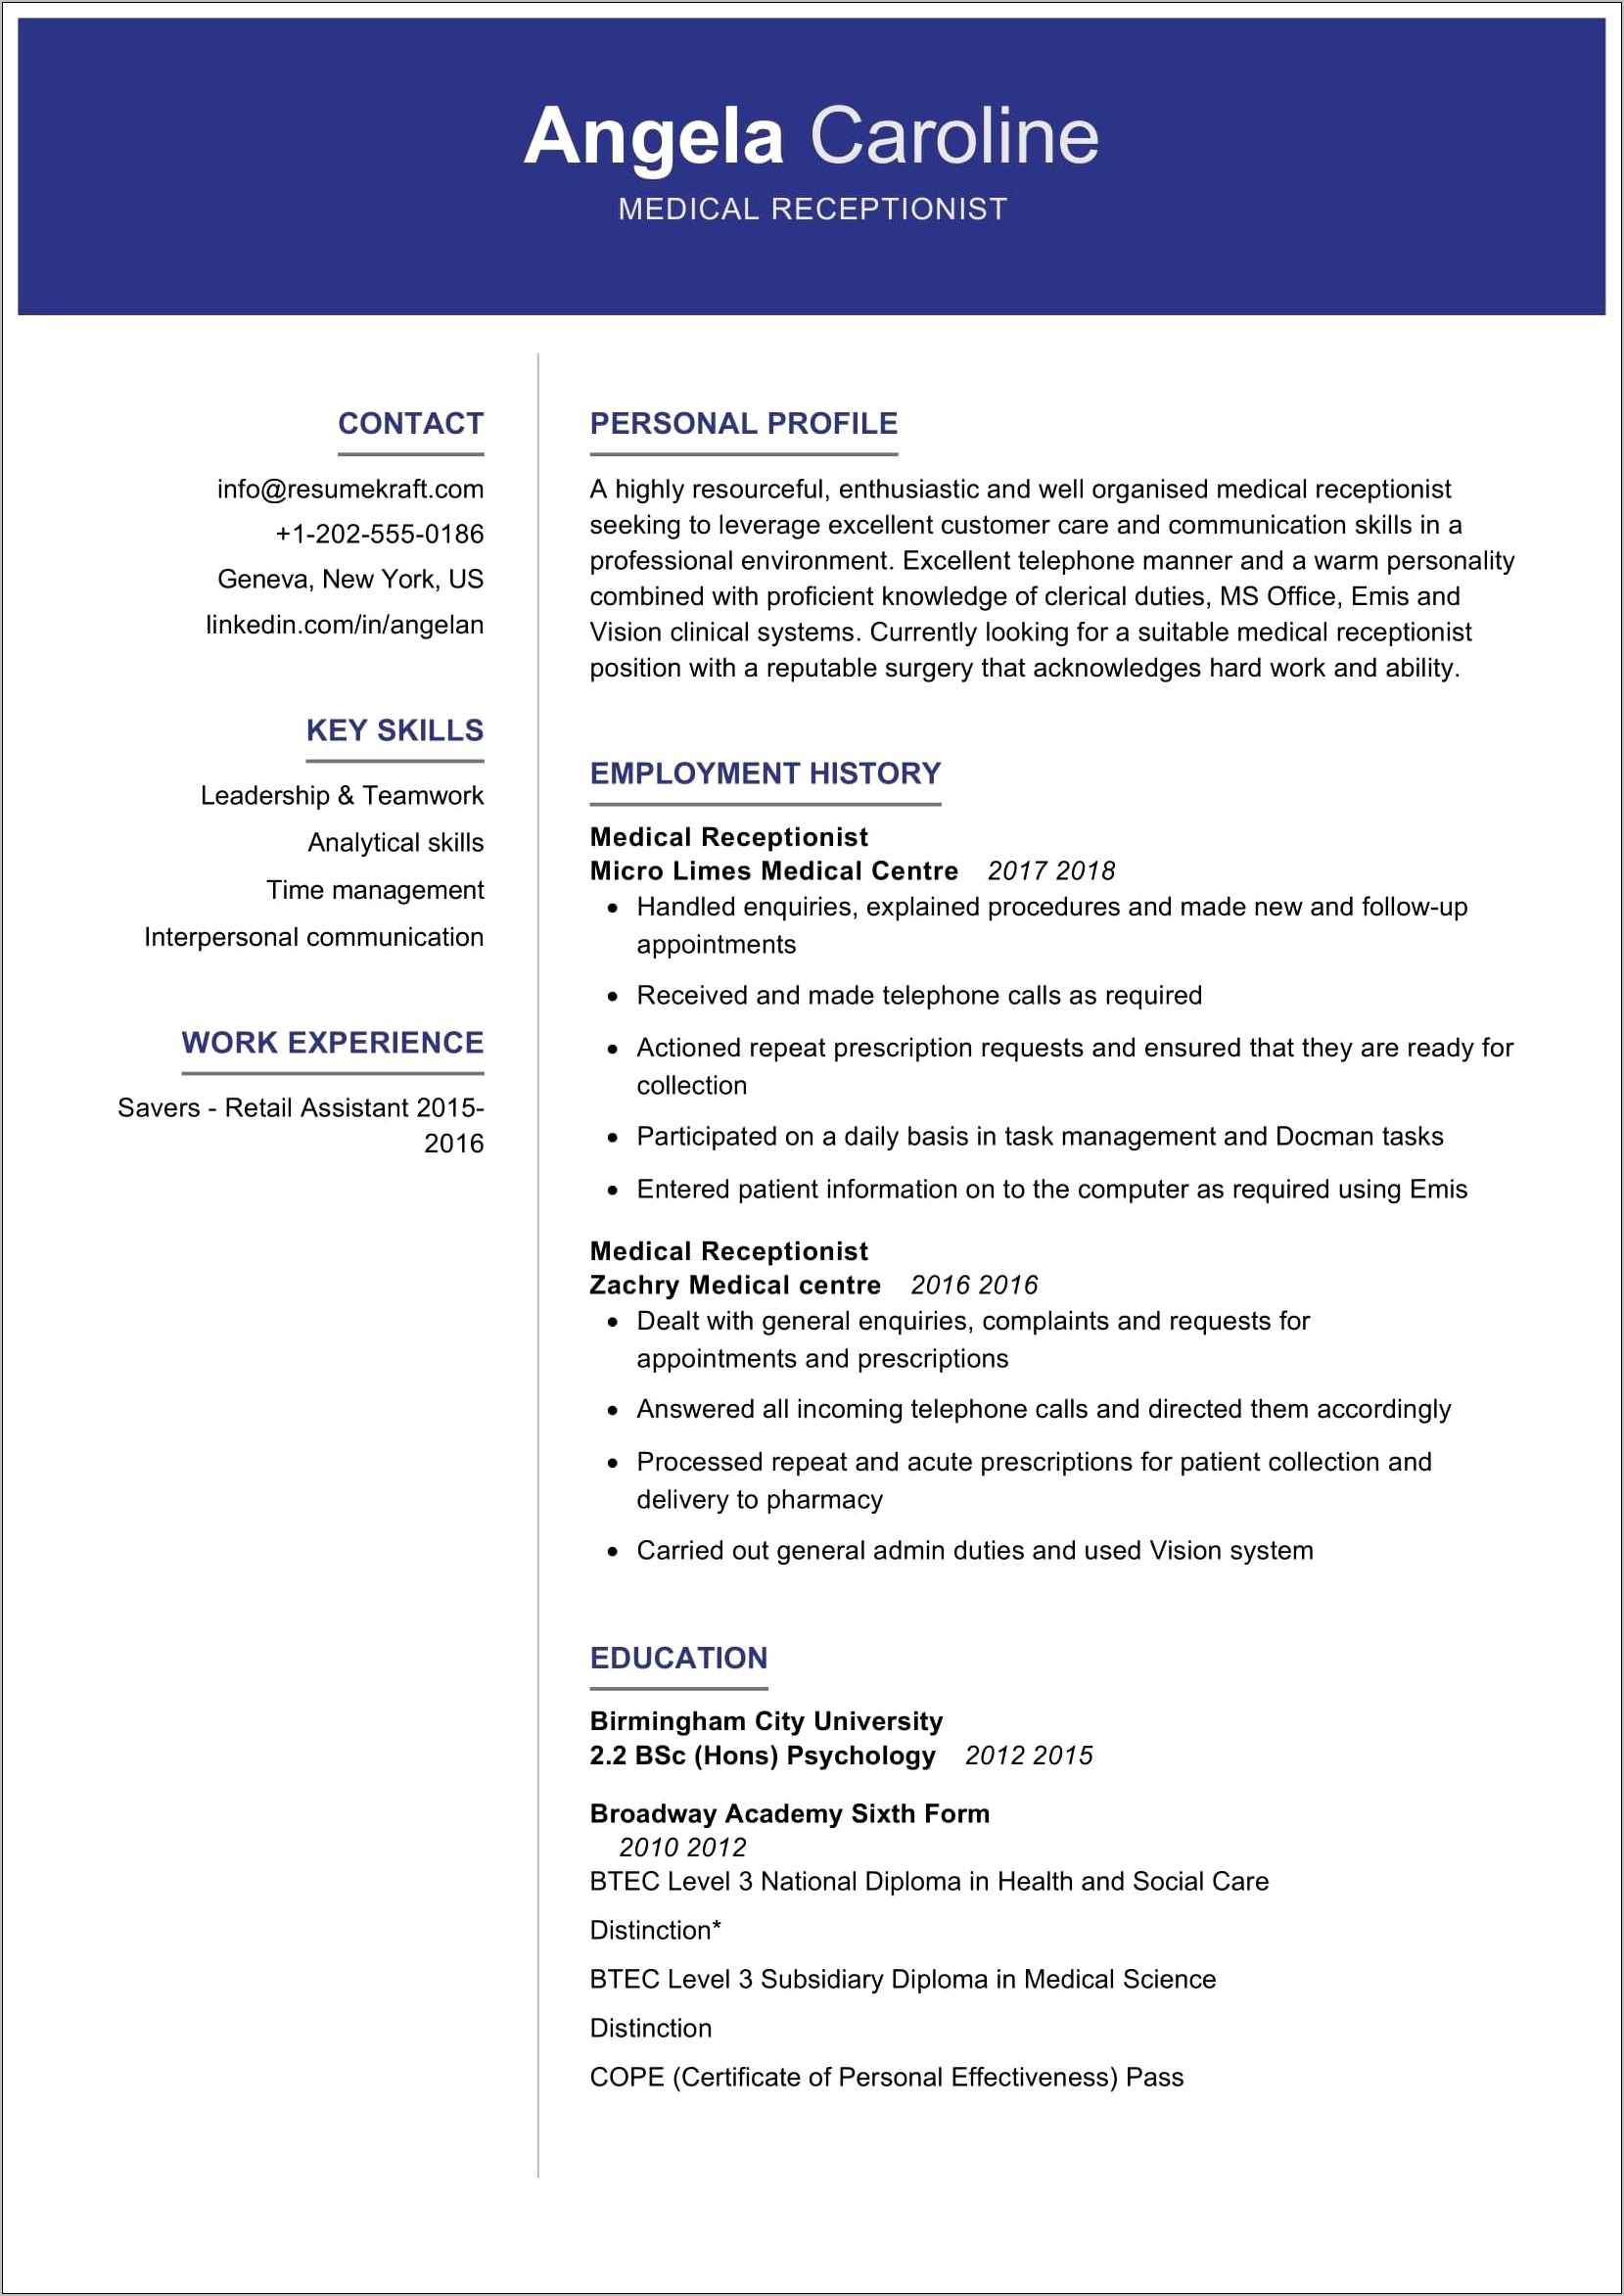 Sample Resume For Medical Receptionist With No Experience